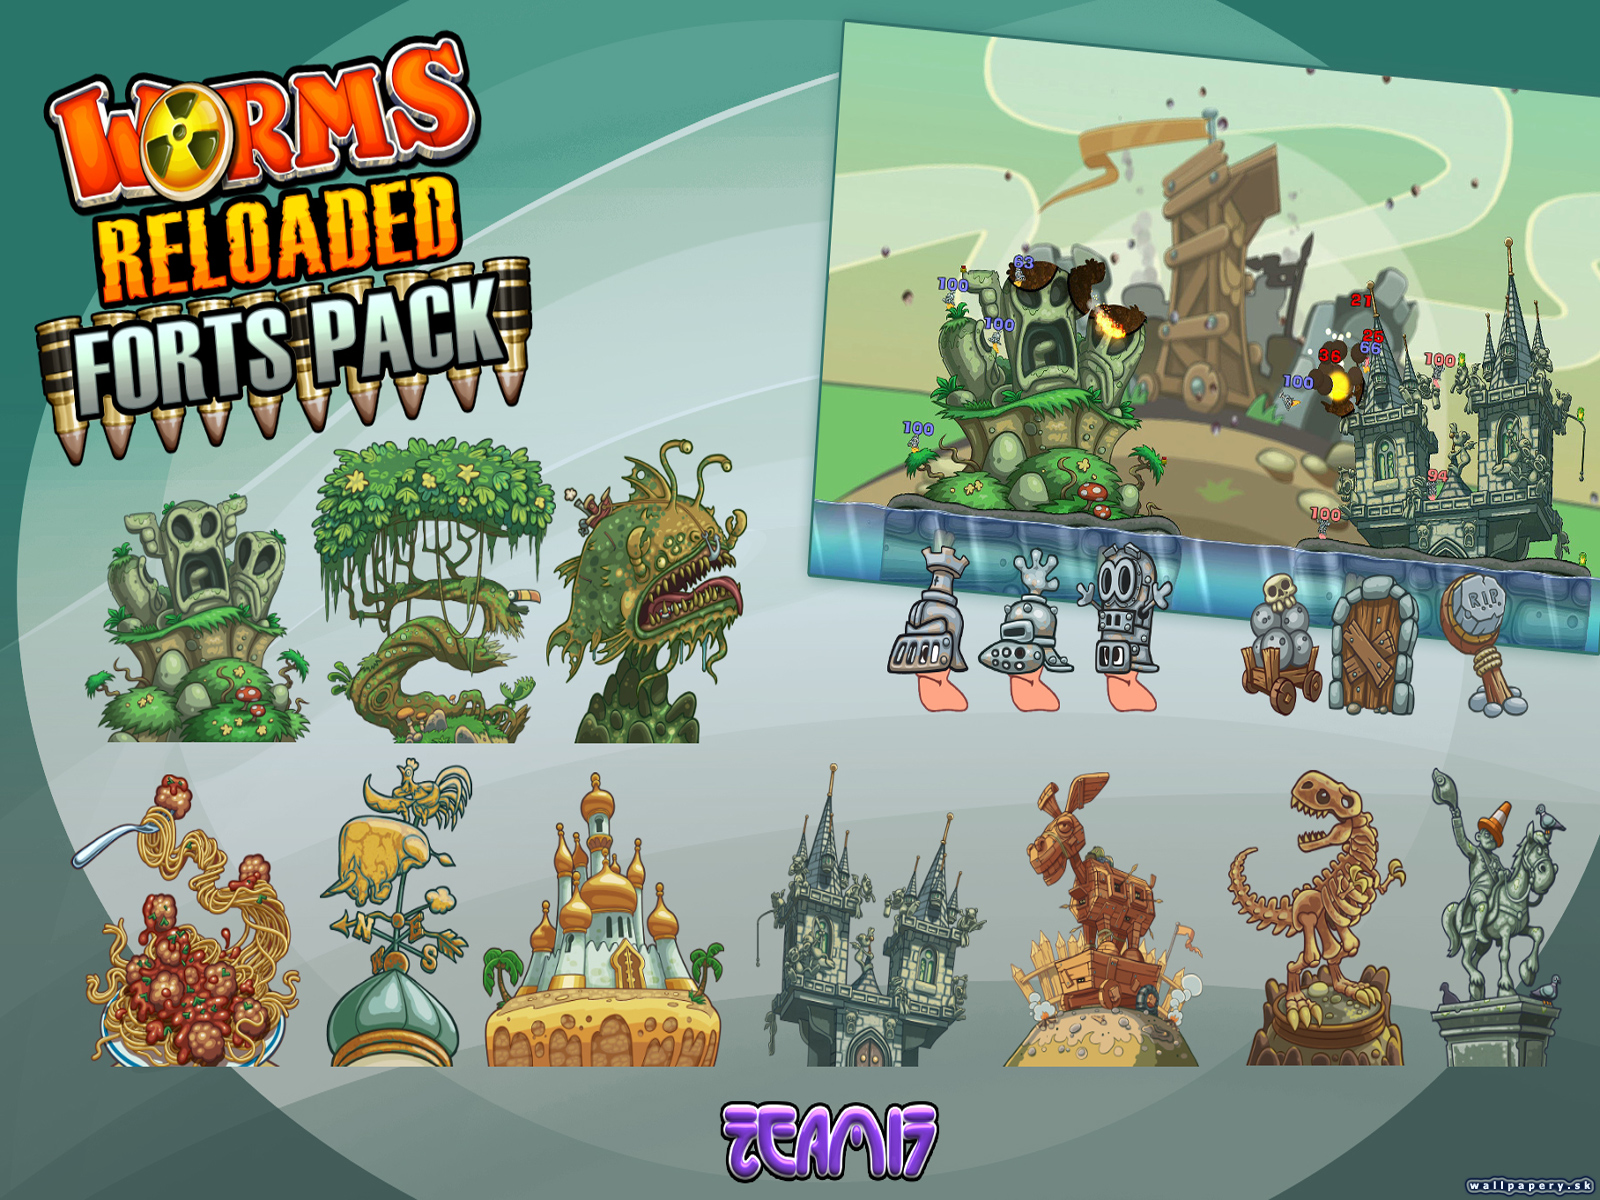 Worms Reloaded: Forts Pack - wallpaper 1